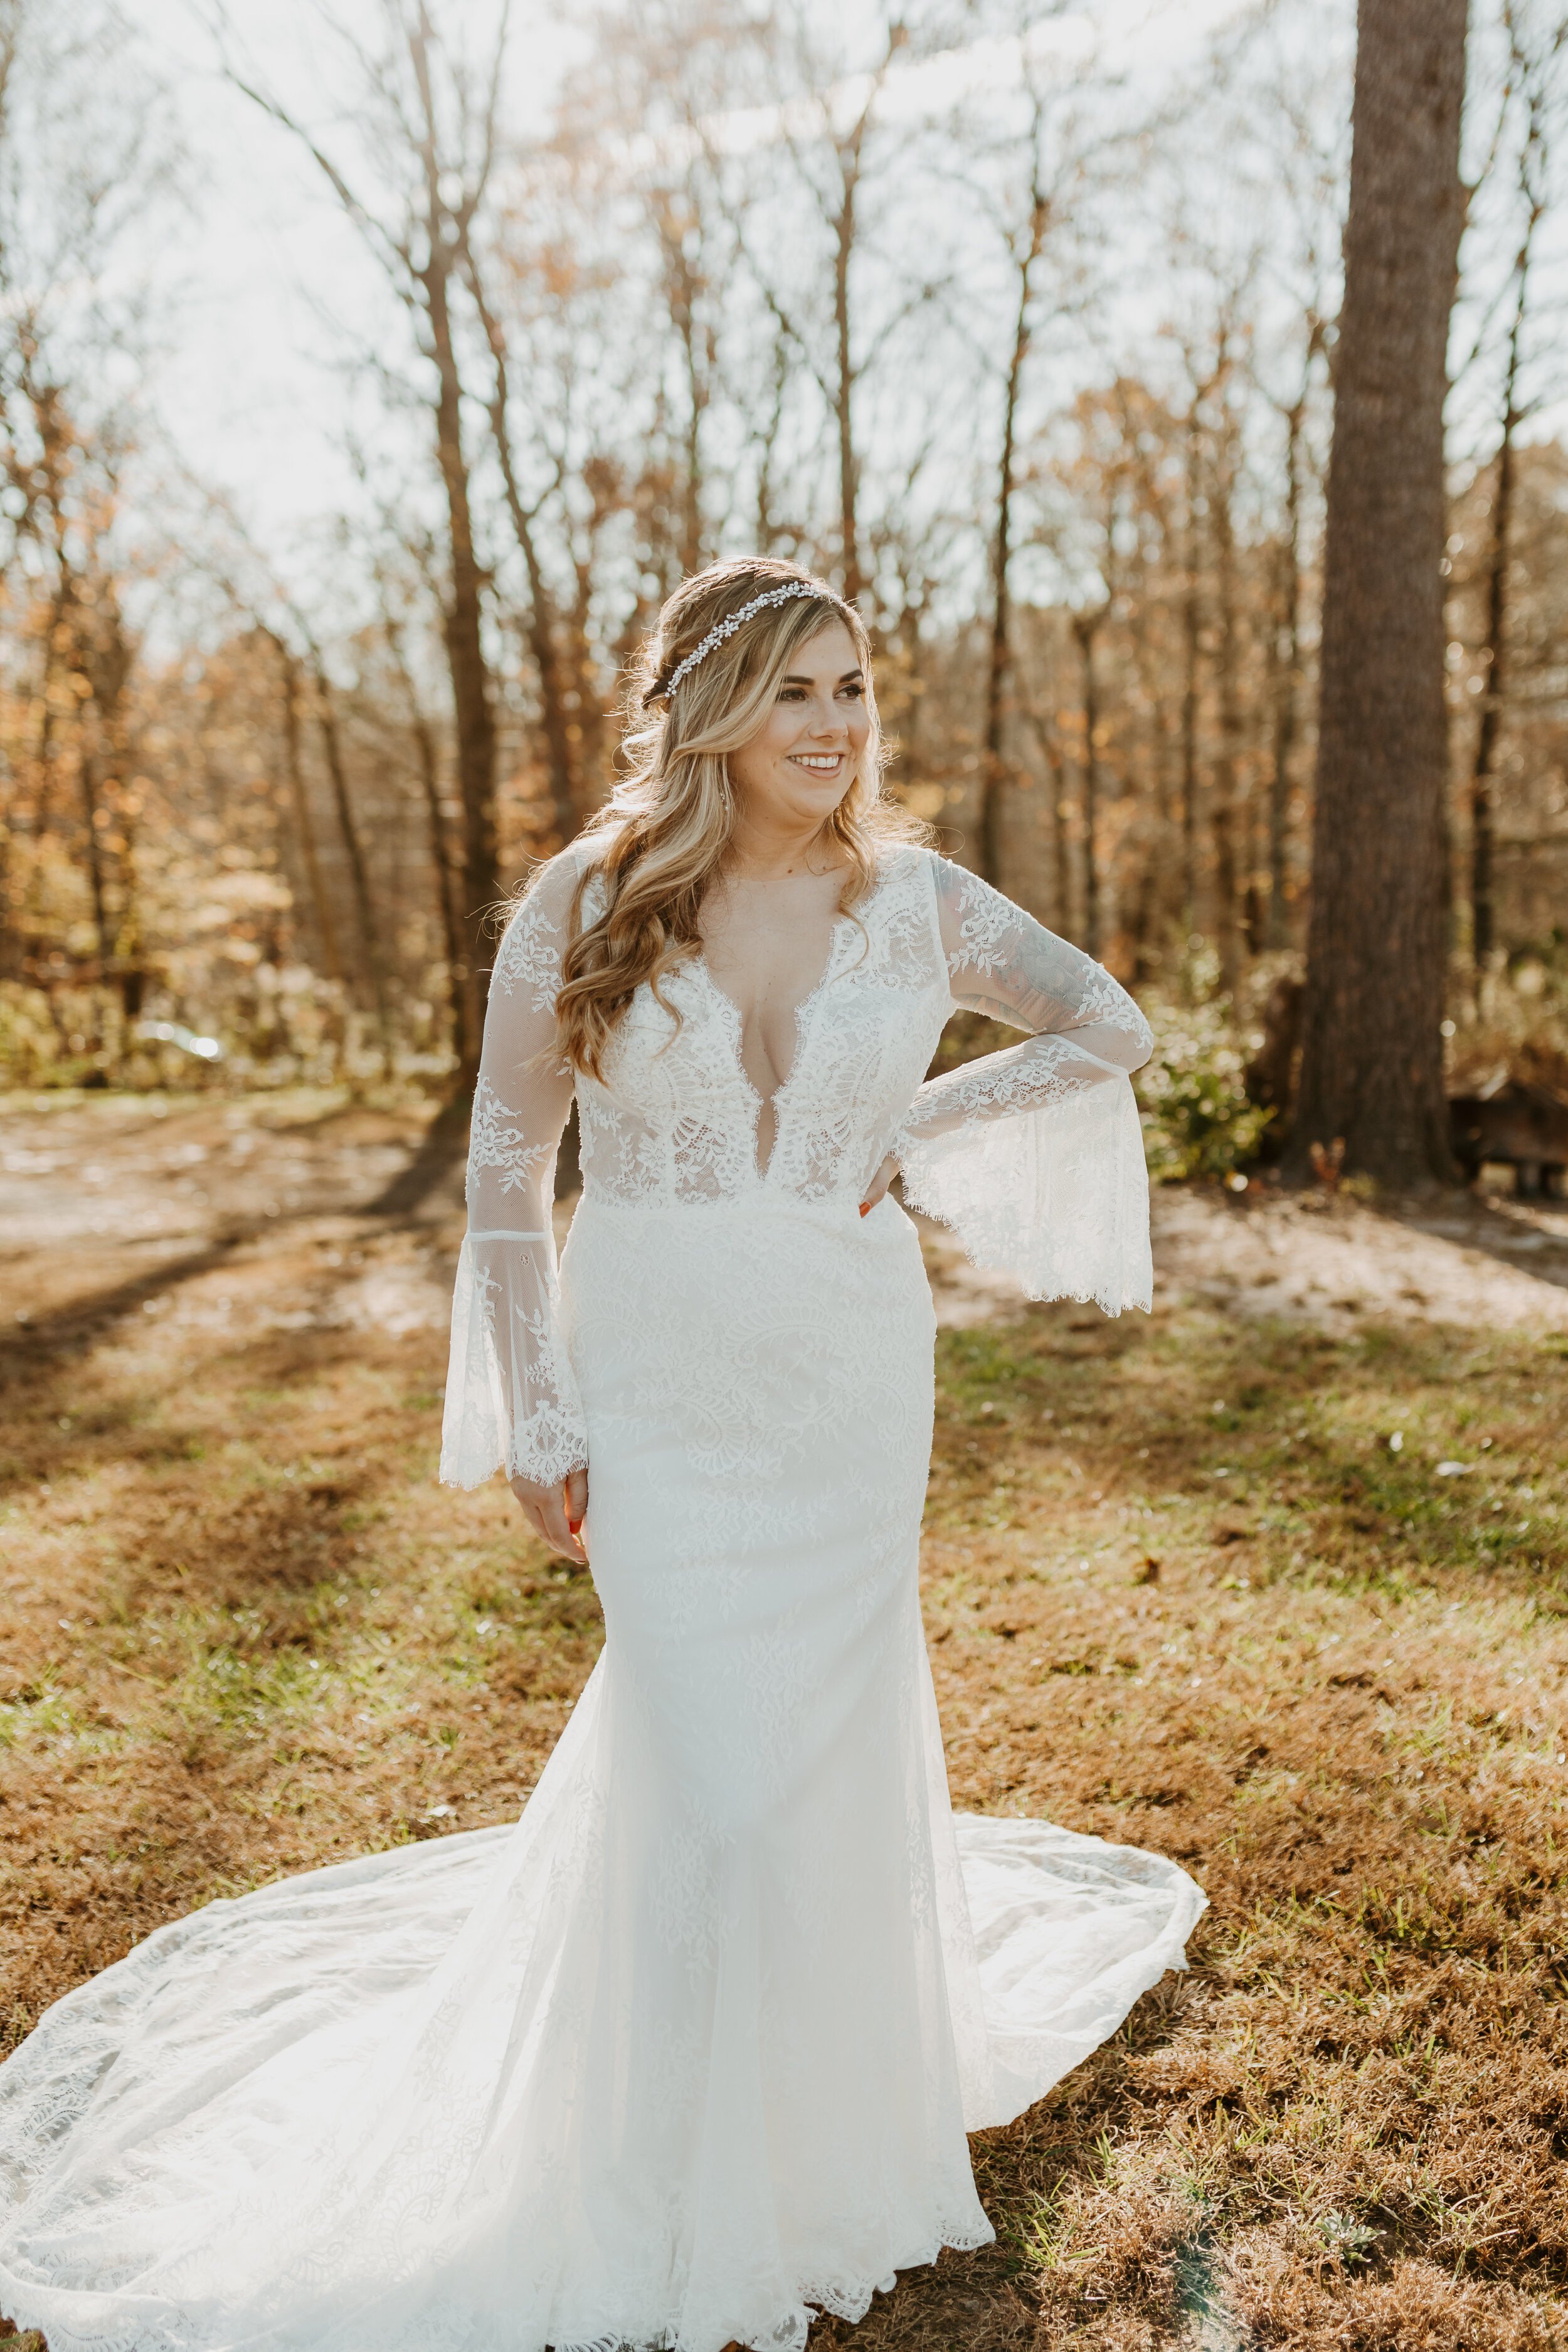 ivory-and-beau-bride-kaitlyn-down-for-the-gown-real-bride-wedding-dress-bridal-gown-wedding-gown-bridal-shop-bridal-boutique-bridal-shopping-bridal-appointment-lamour-by-calla-blanche-_O3A7350.jpg